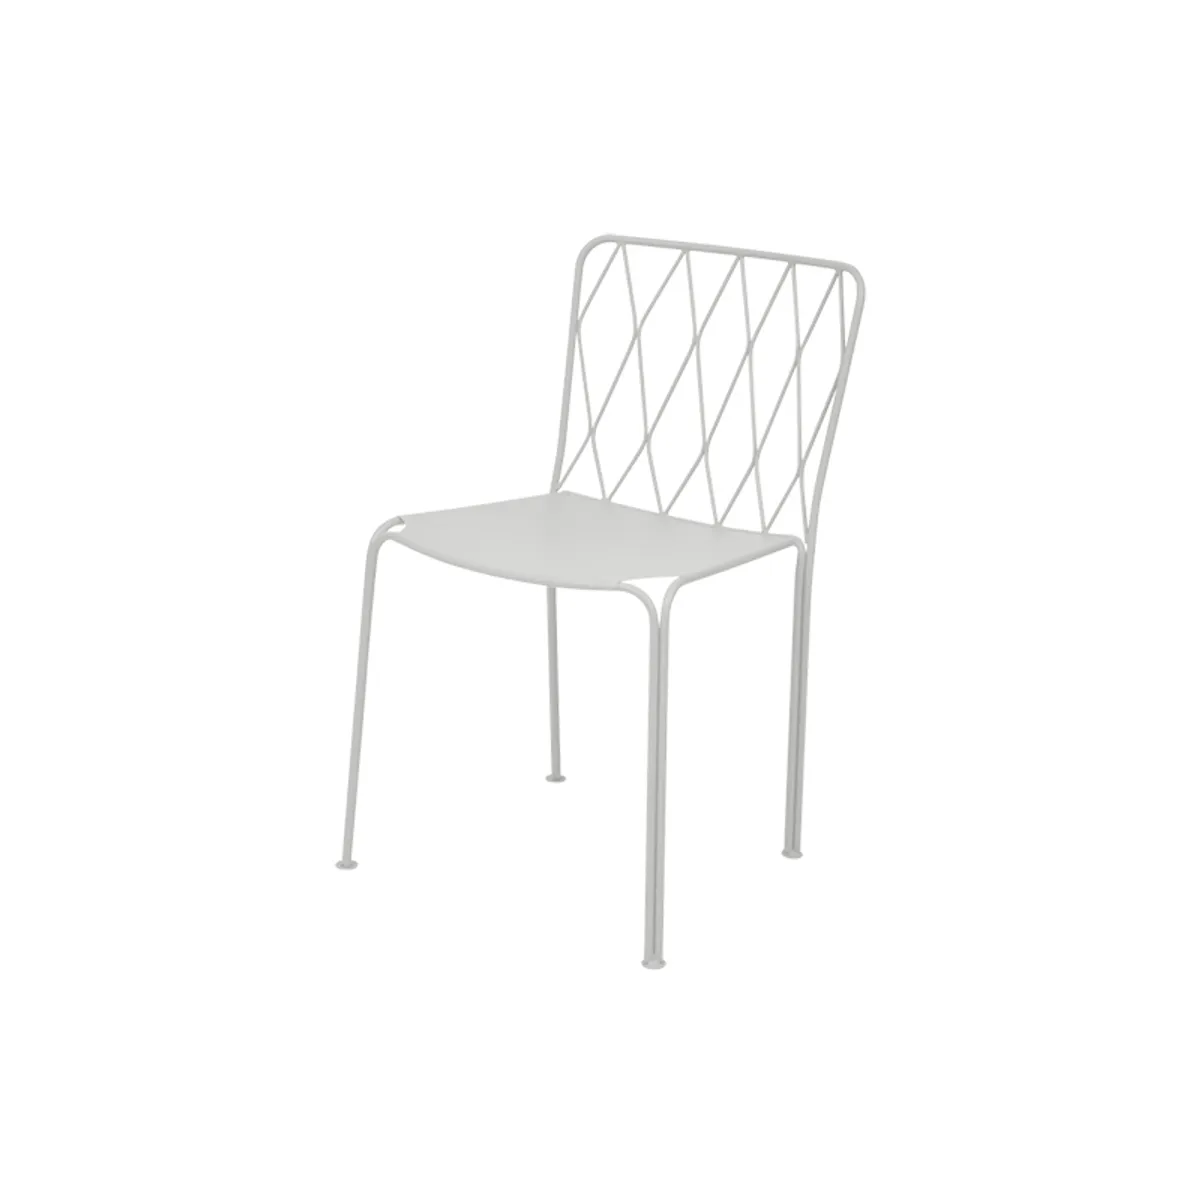 Kintbury Side Chair For Outdoors Bar And Cafe Furniture Grey